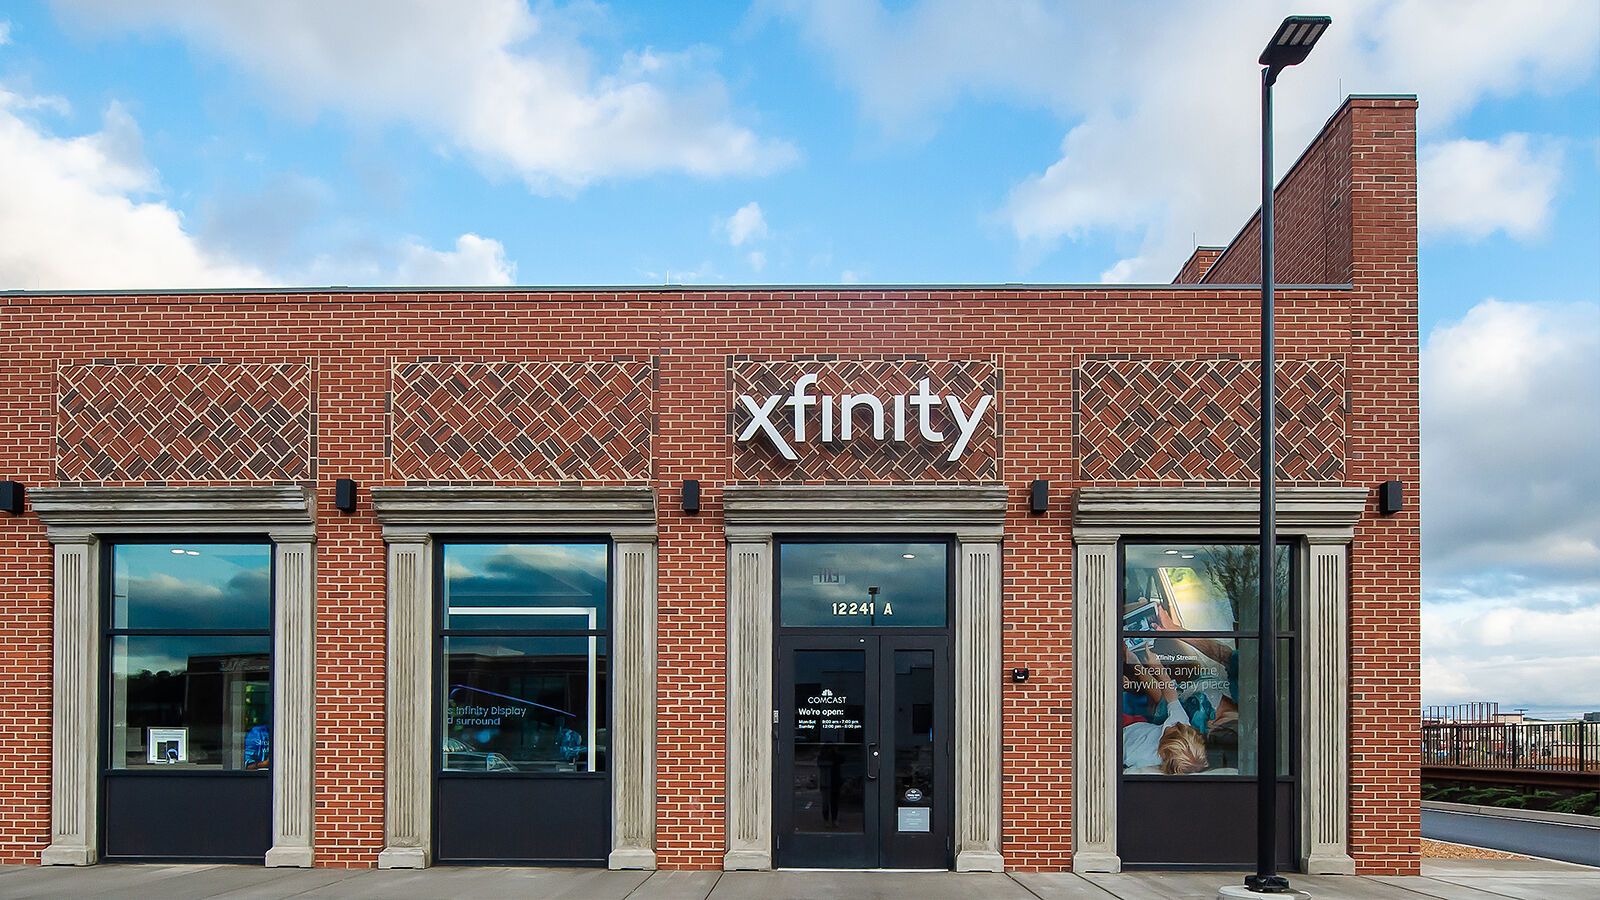 Xfinity: All the free streaming apps you get from Comcast